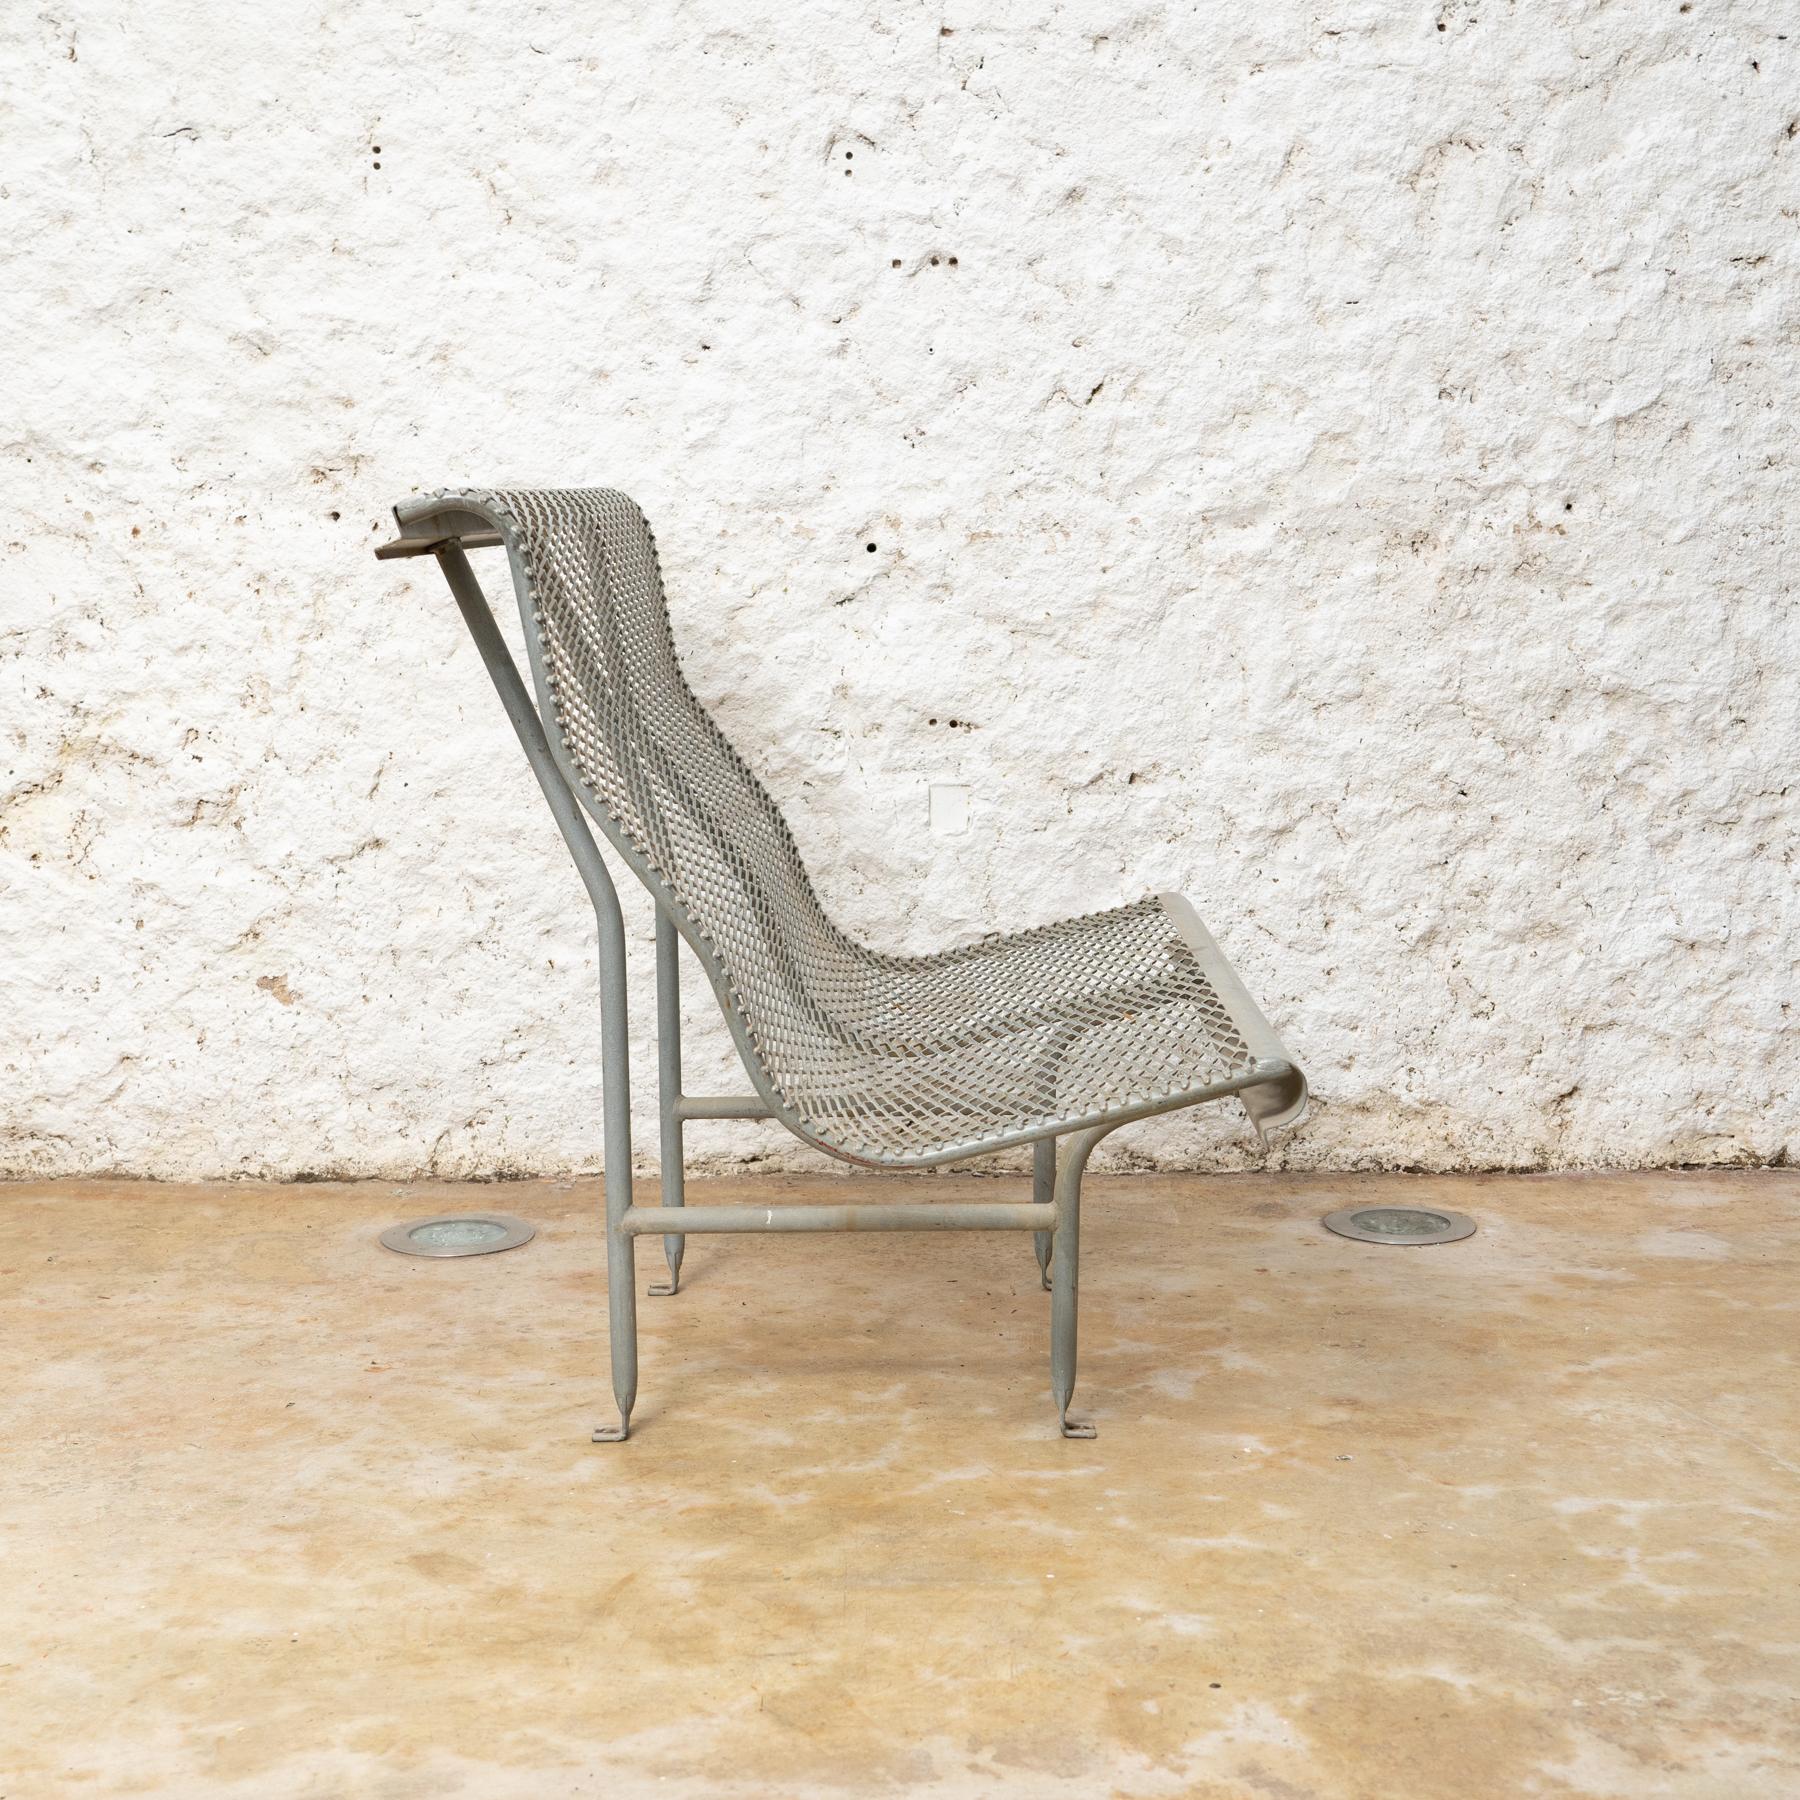 Spanish Metal Bench Version “Perforano” by Oscar Tusquets for BD Barcelona, circa 1980 For Sale